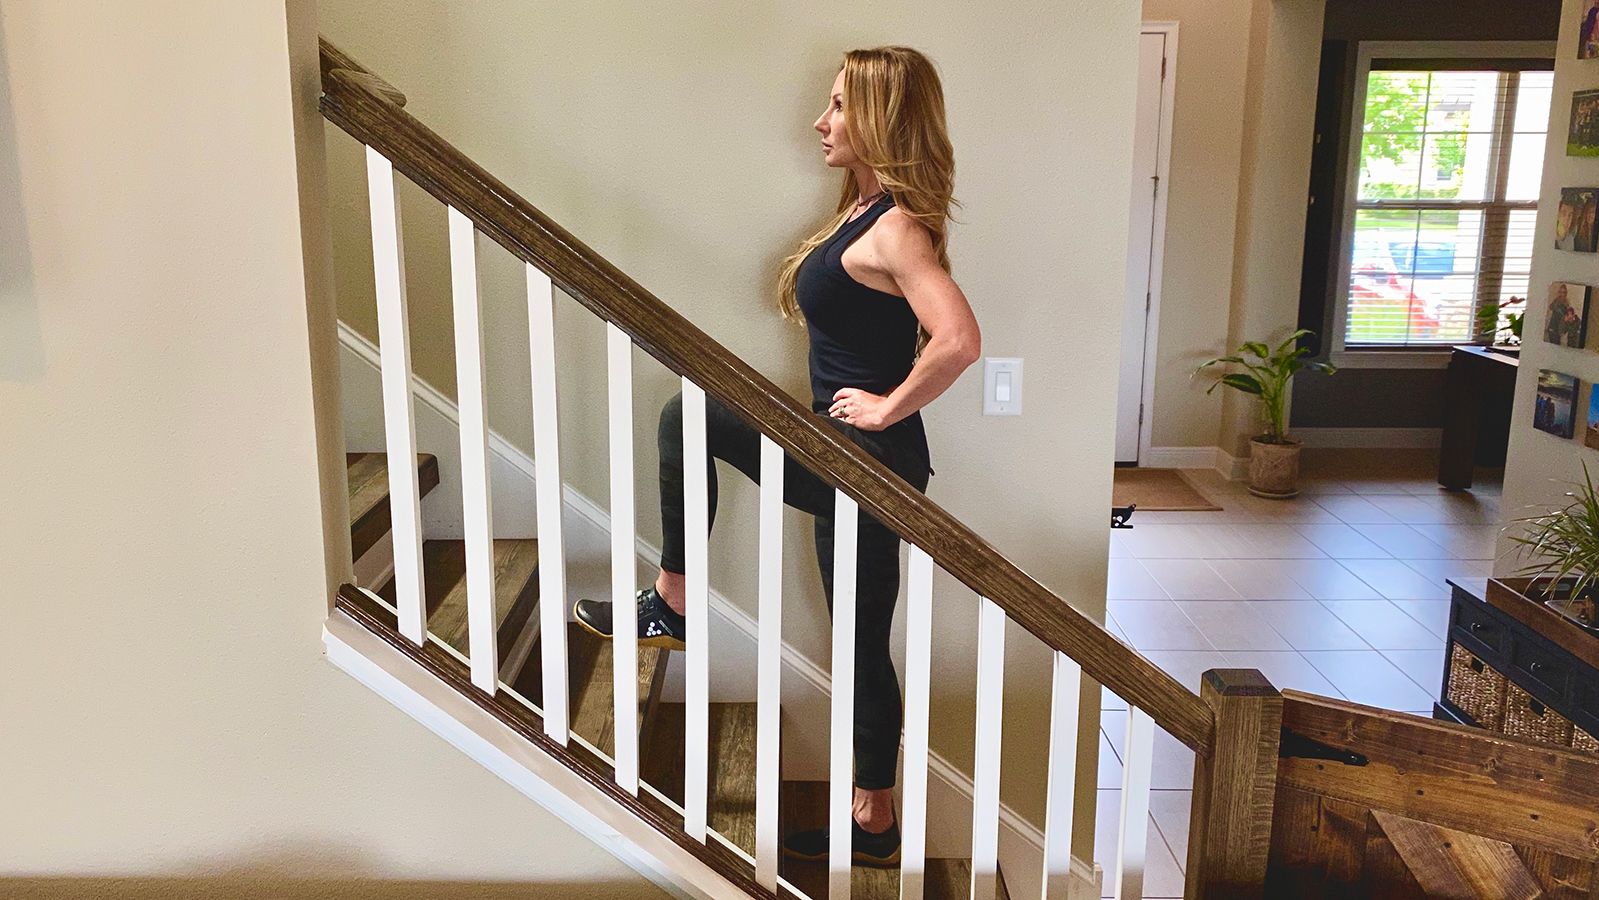 Dana Santas shares a simple yet effective at-home workout using two stairs and your own body weight.